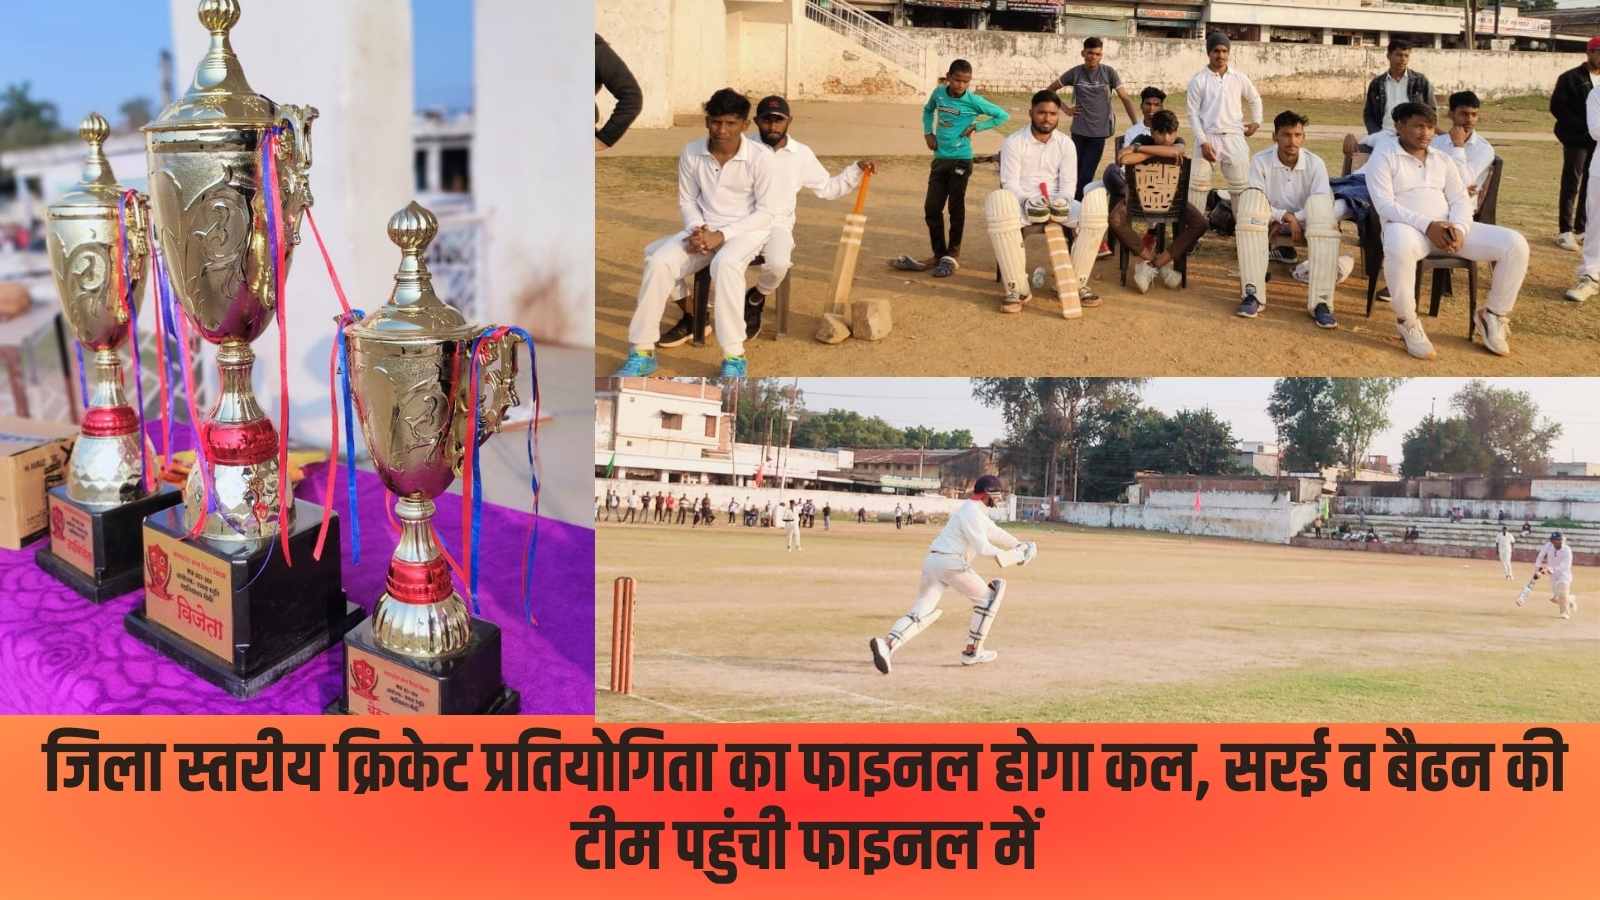 district level cricket competition